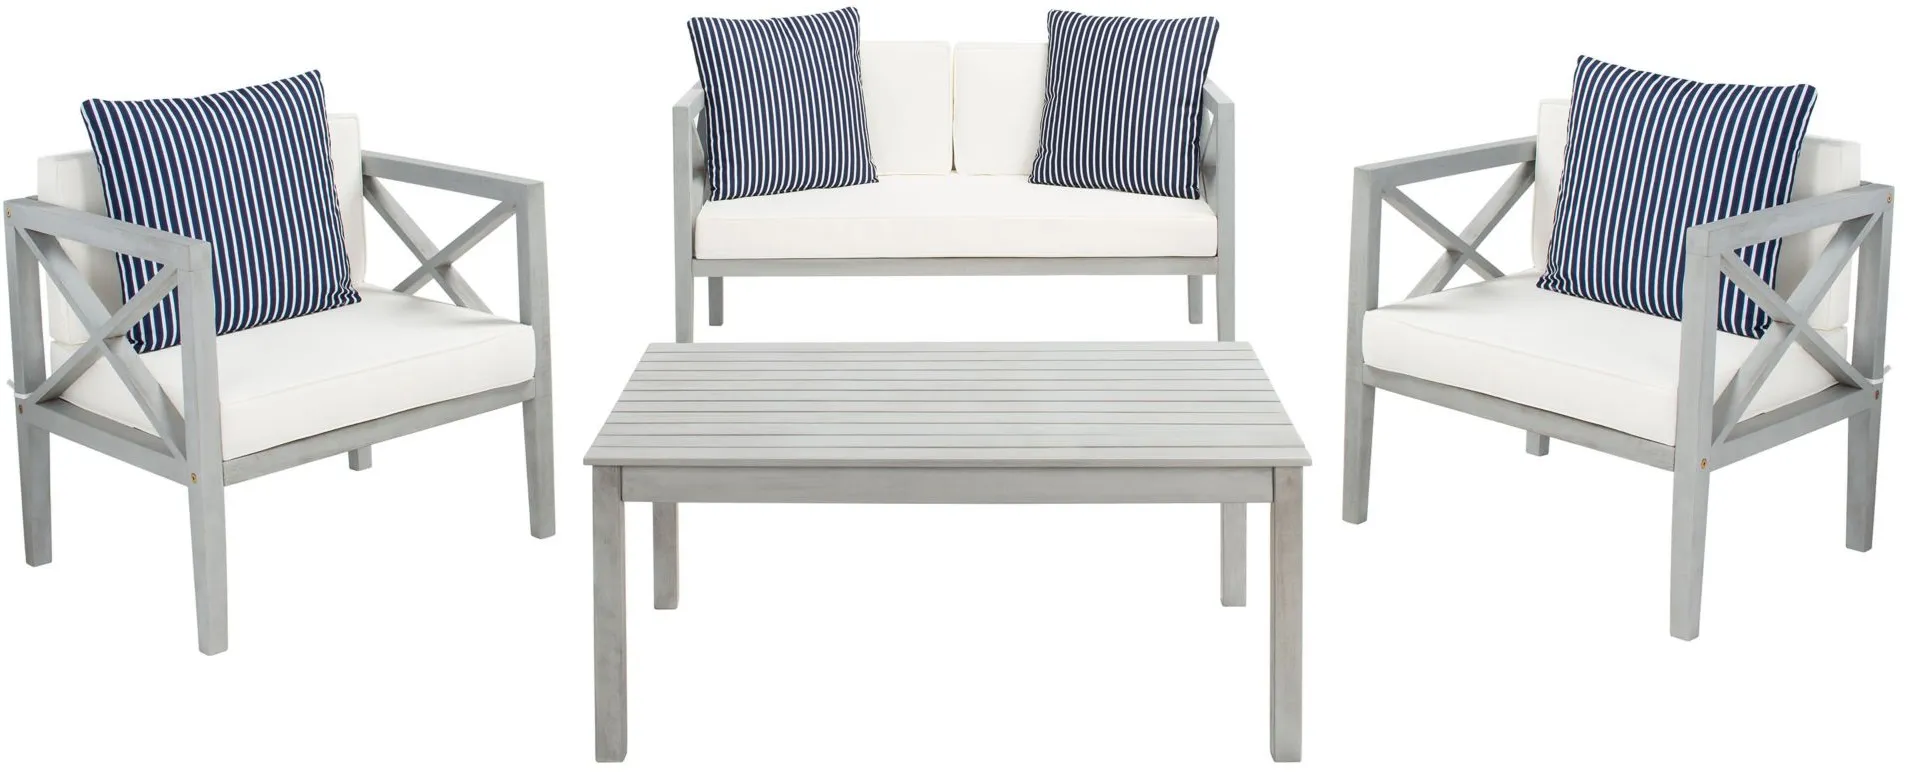 Johannes 4-pc. Patio Set in White / Natural by Safavieh